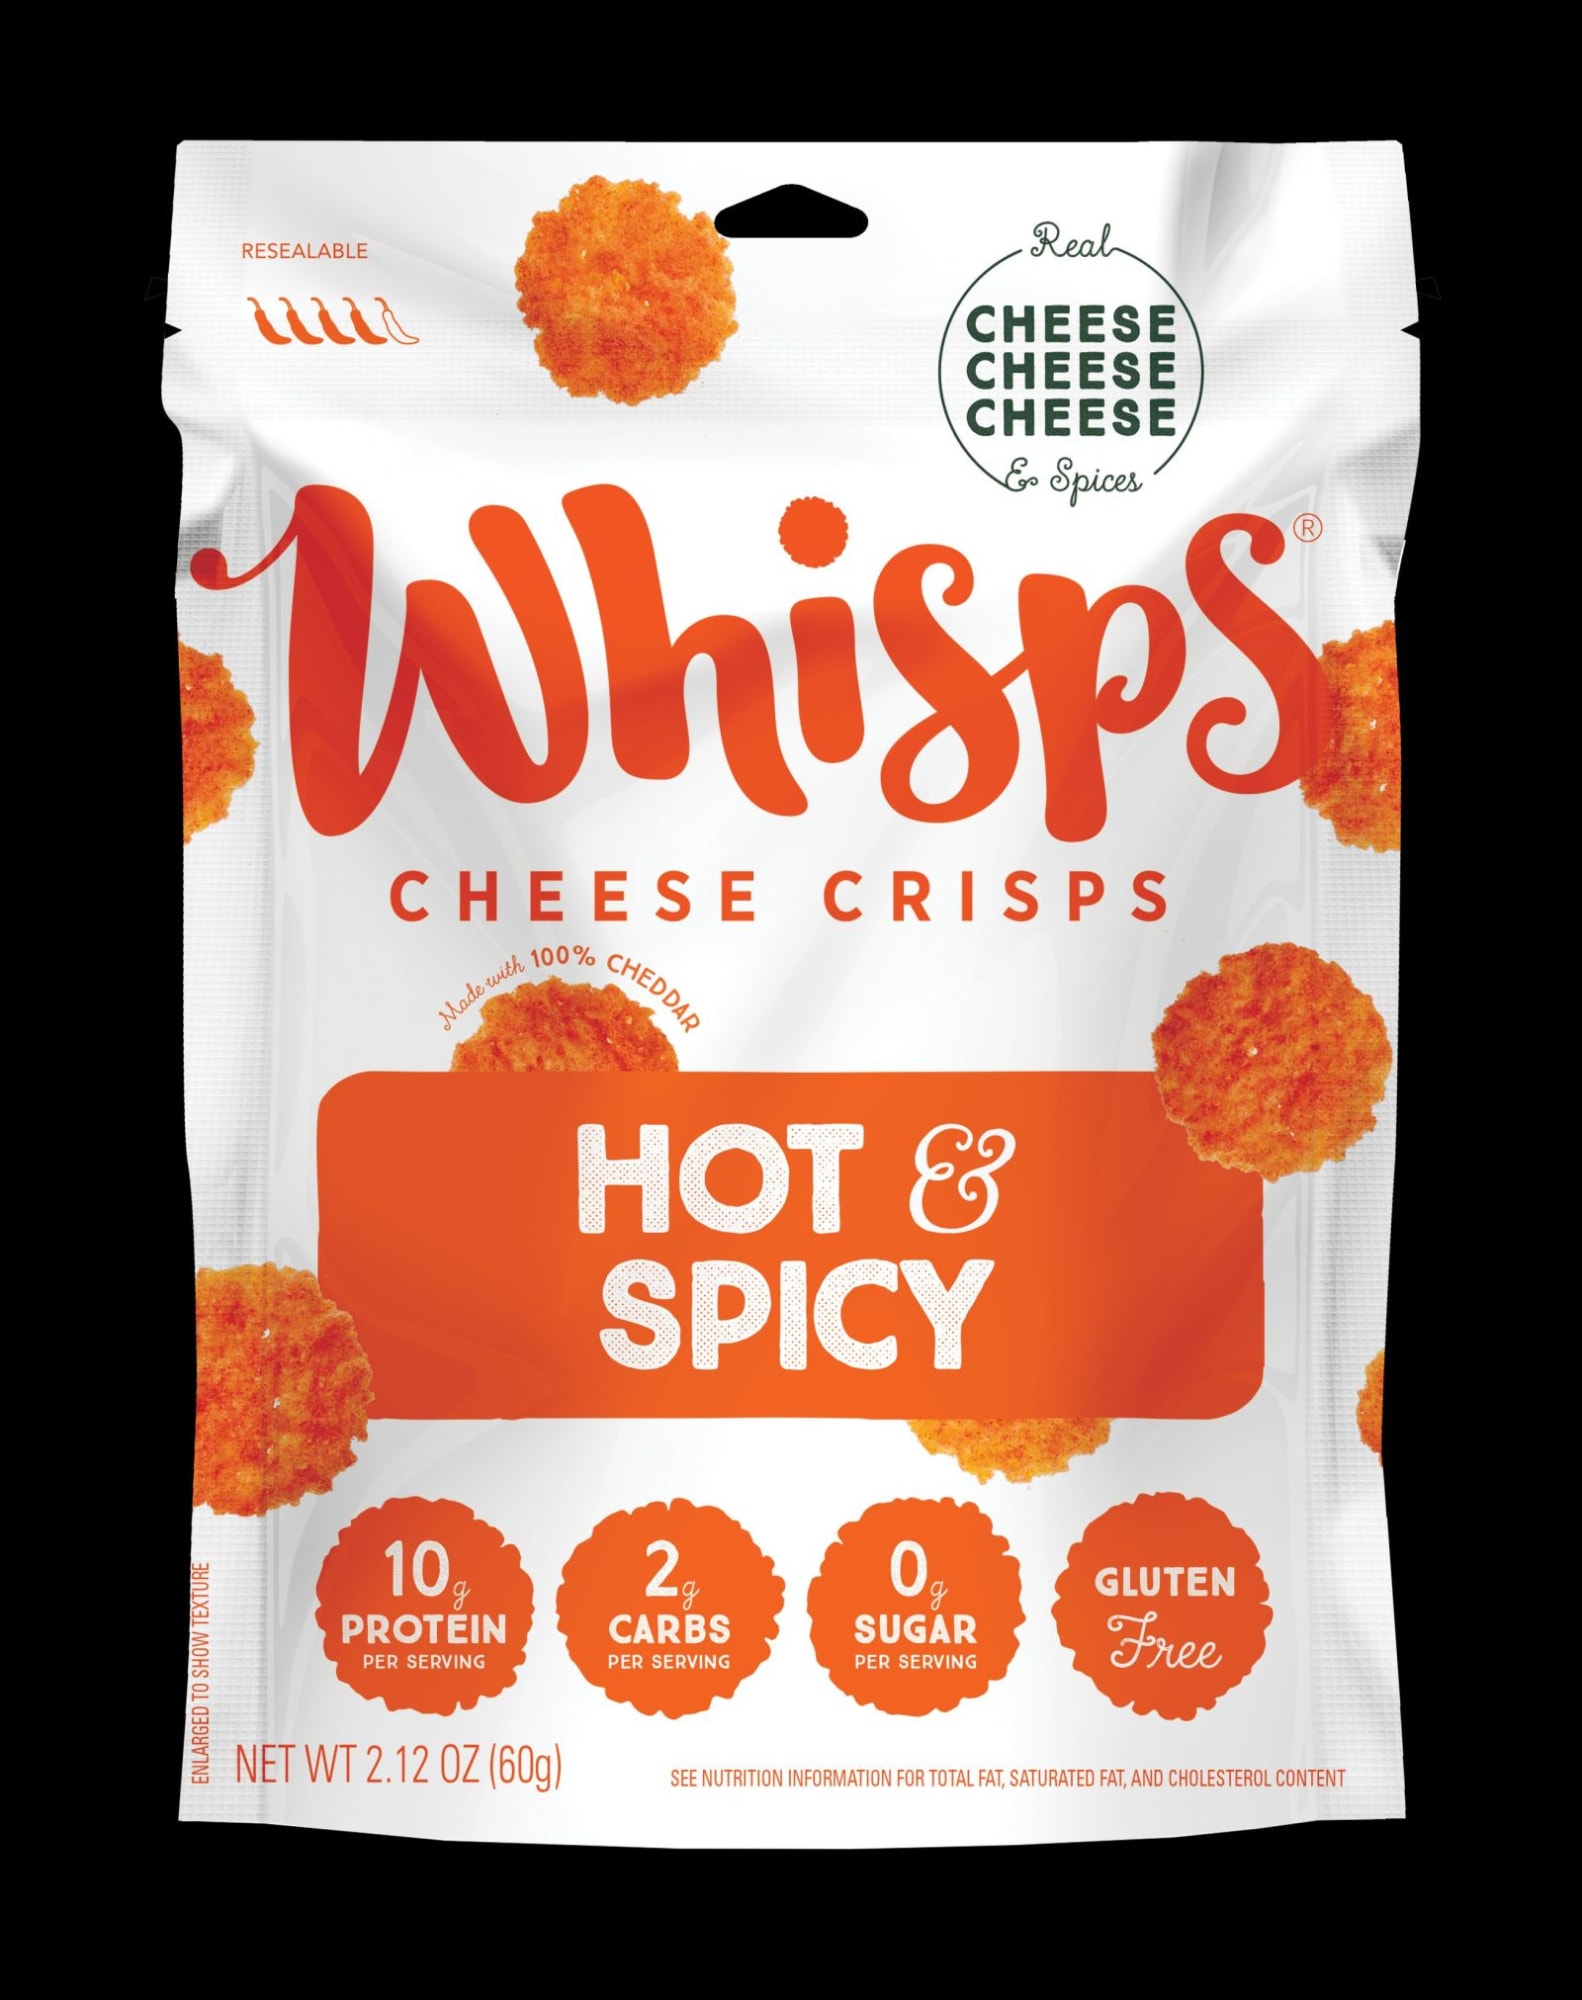 Whisps hot and spicy cheese crisps are not the next Cheetos